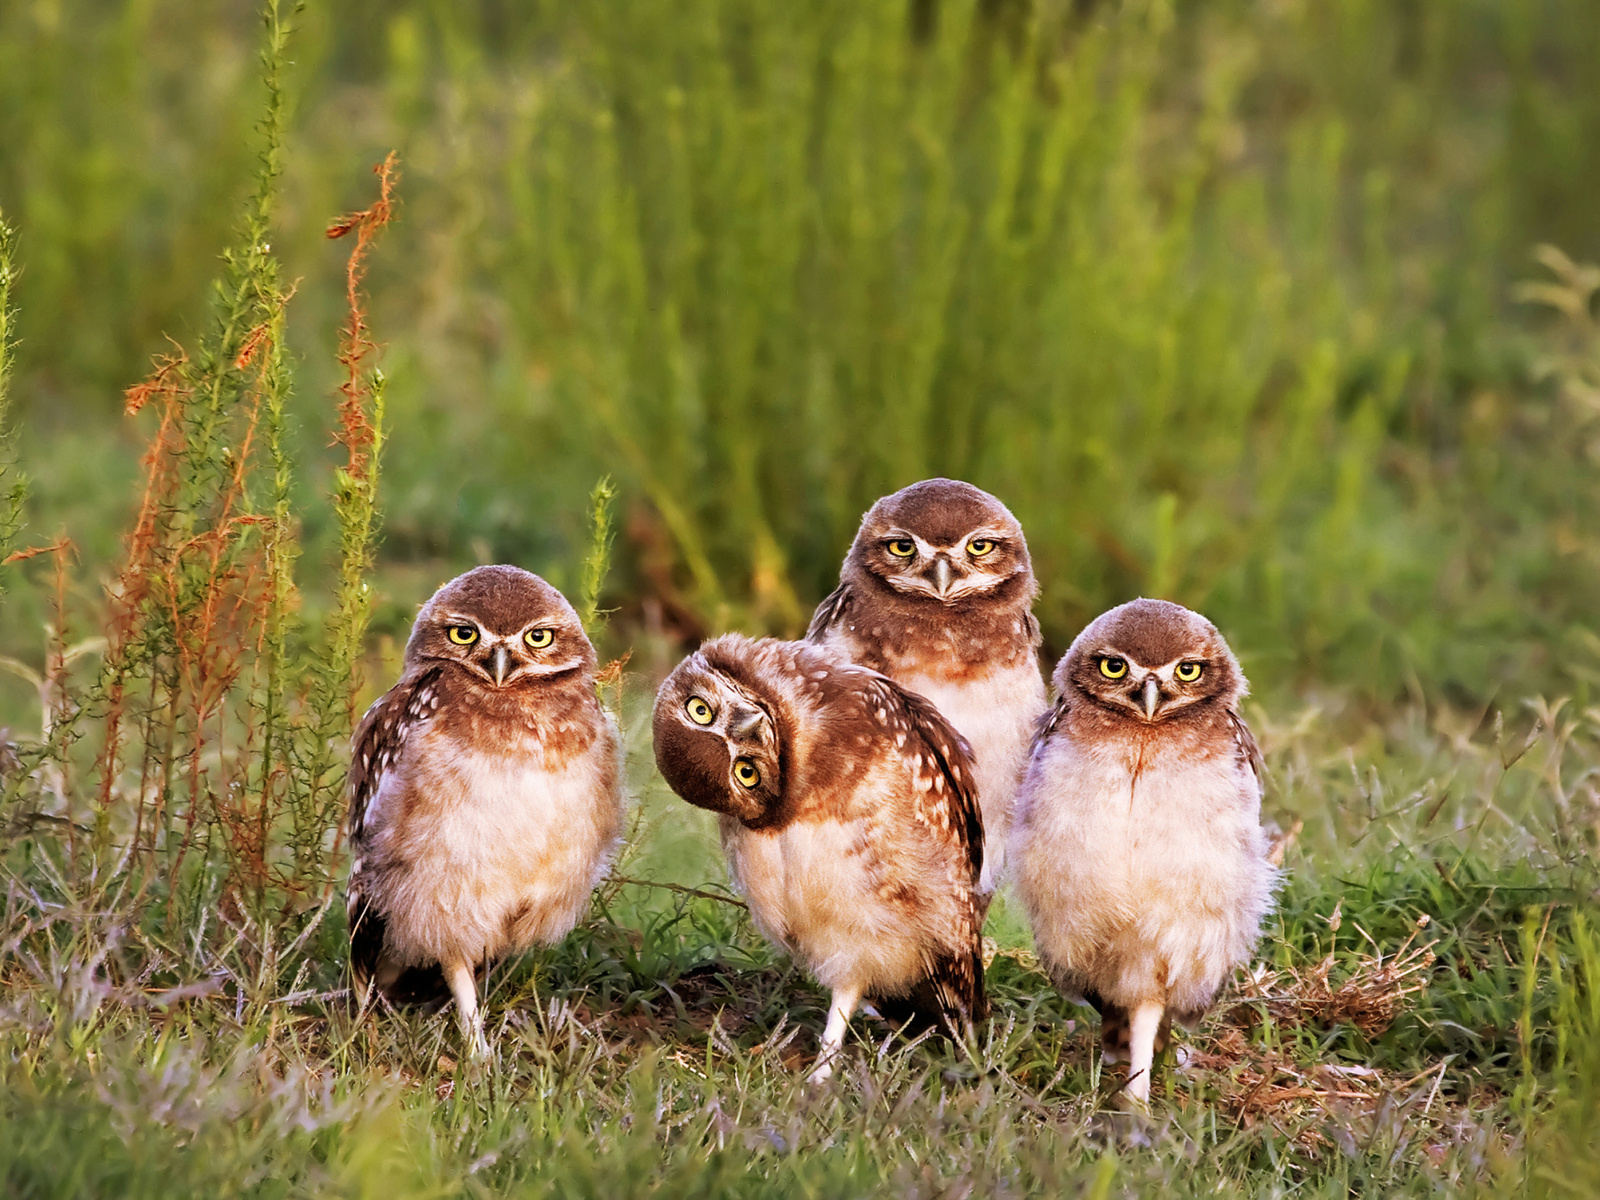 Das Morning with owls Wallpaper 1600x1200